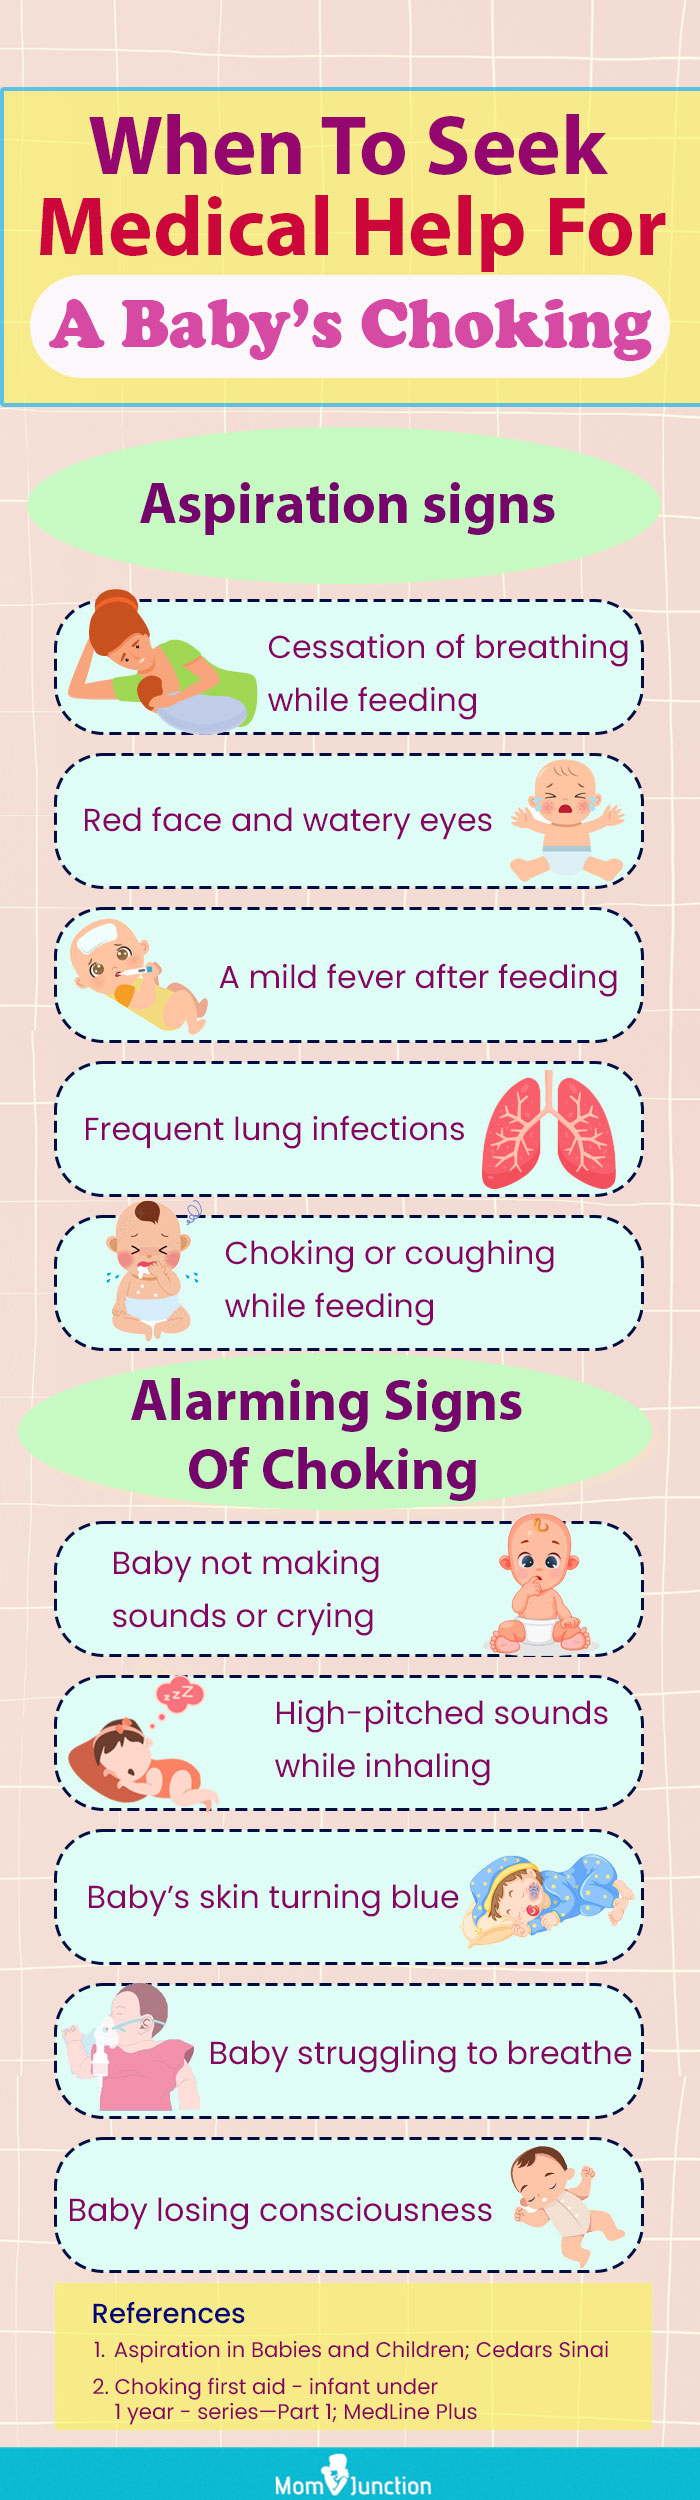 when to seek medical help for a baby’s choking (infographic)